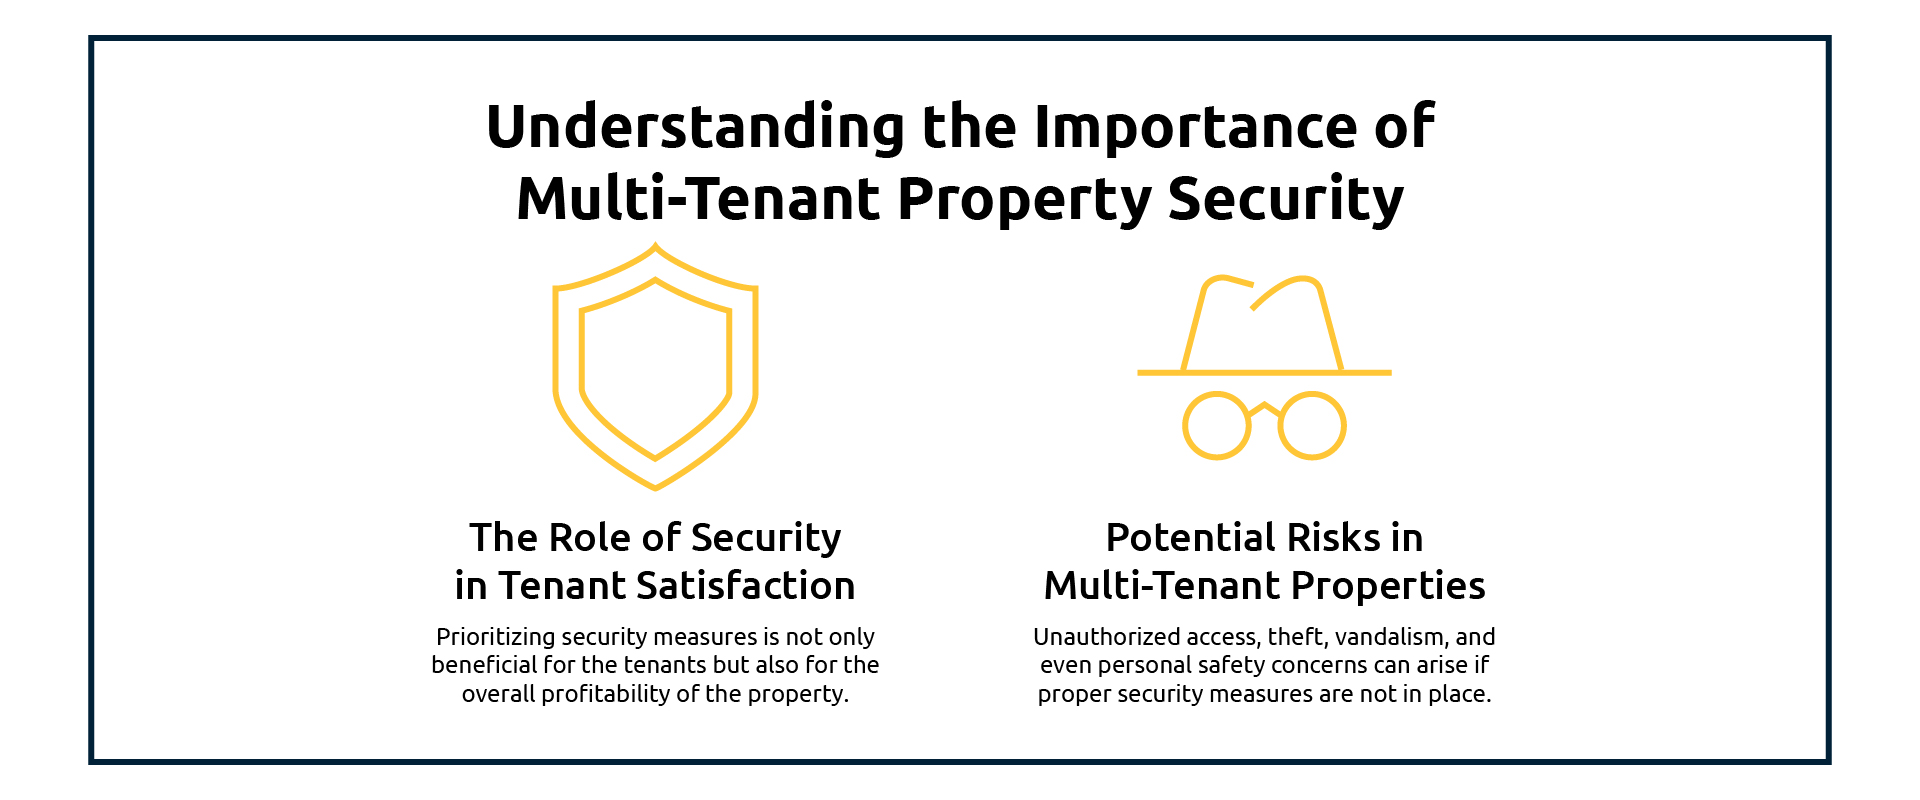 Understanding the Importance of Multi-Tenant Property Security